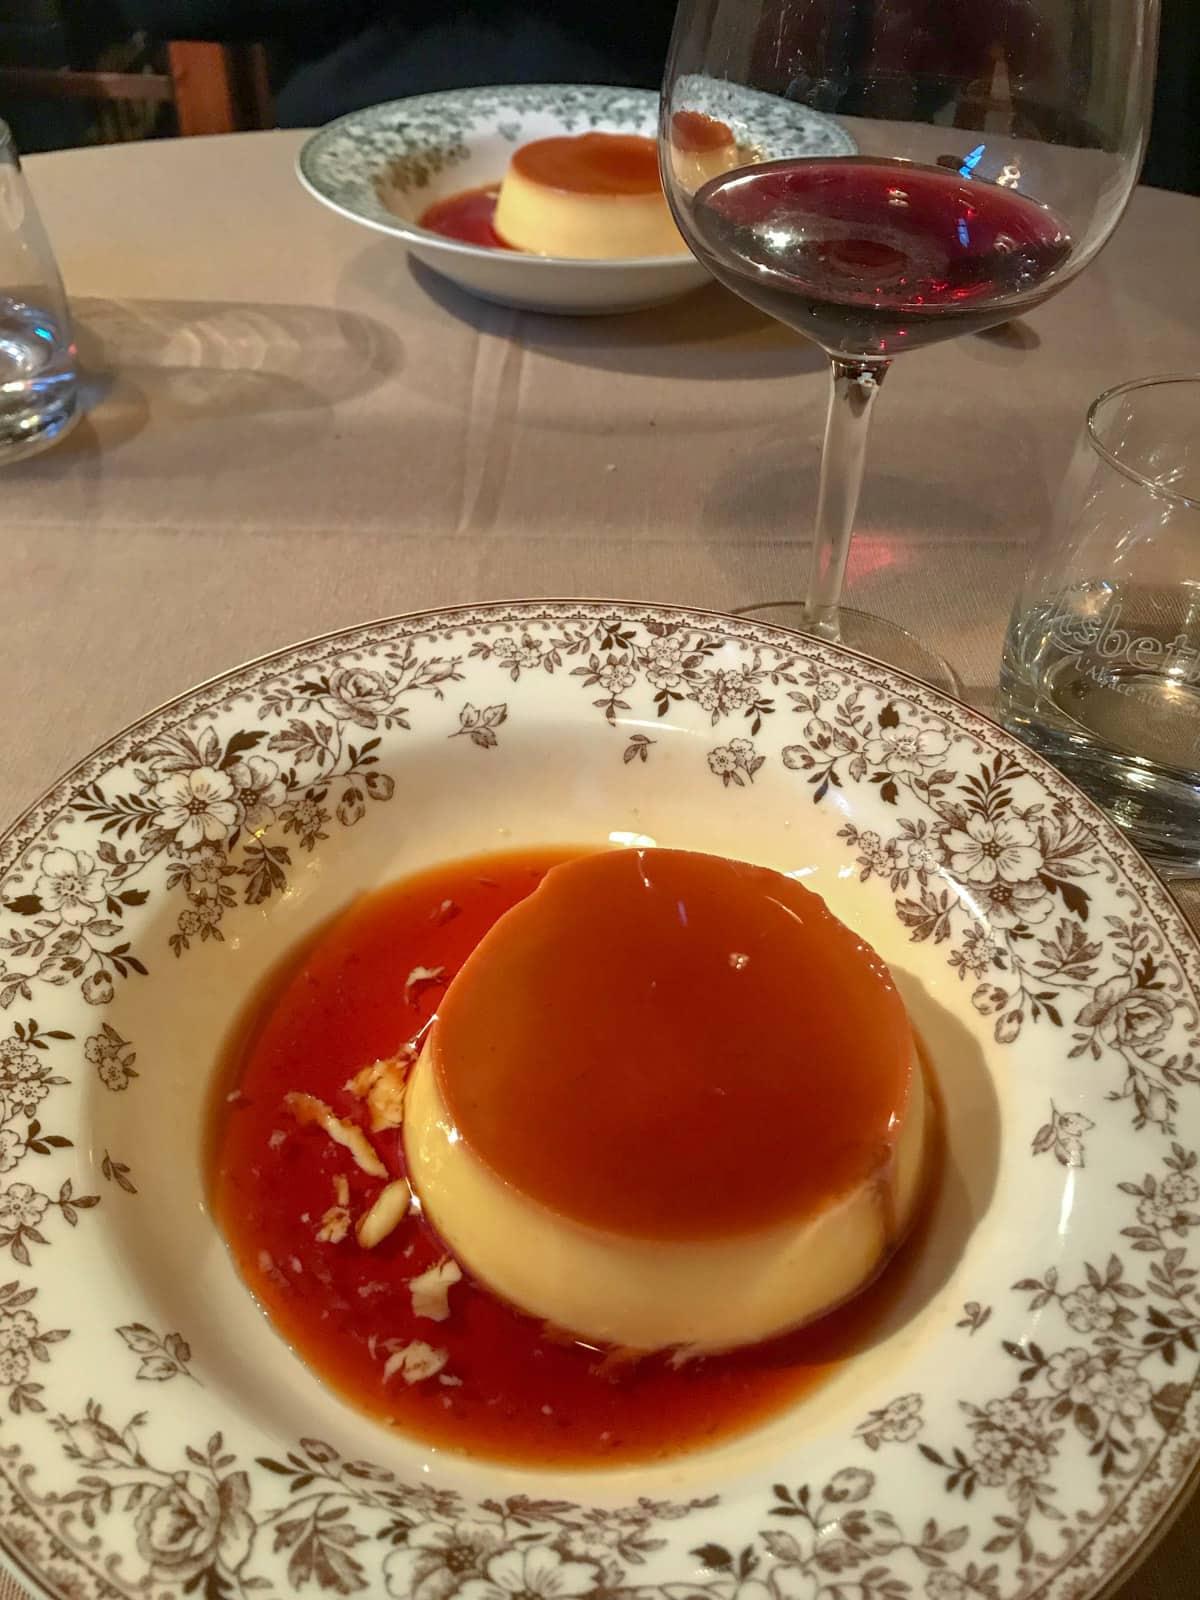 A shallow bowl with a dessert of caramel pudding with lots of caramel sauce